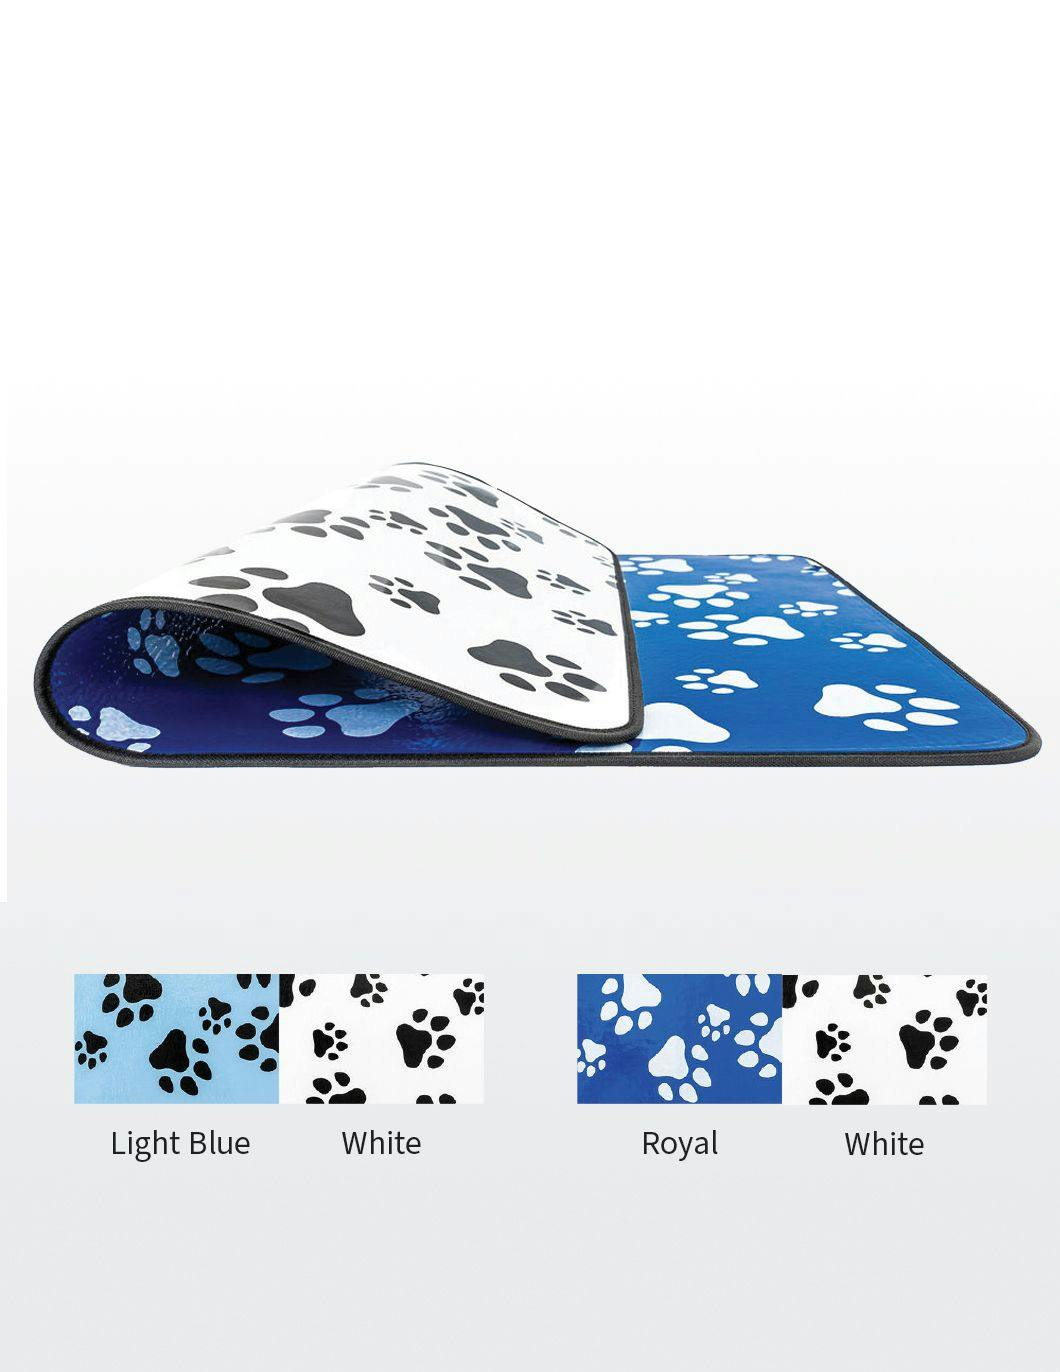 2-Sided-2-Color-Exam-Comfort-Mat